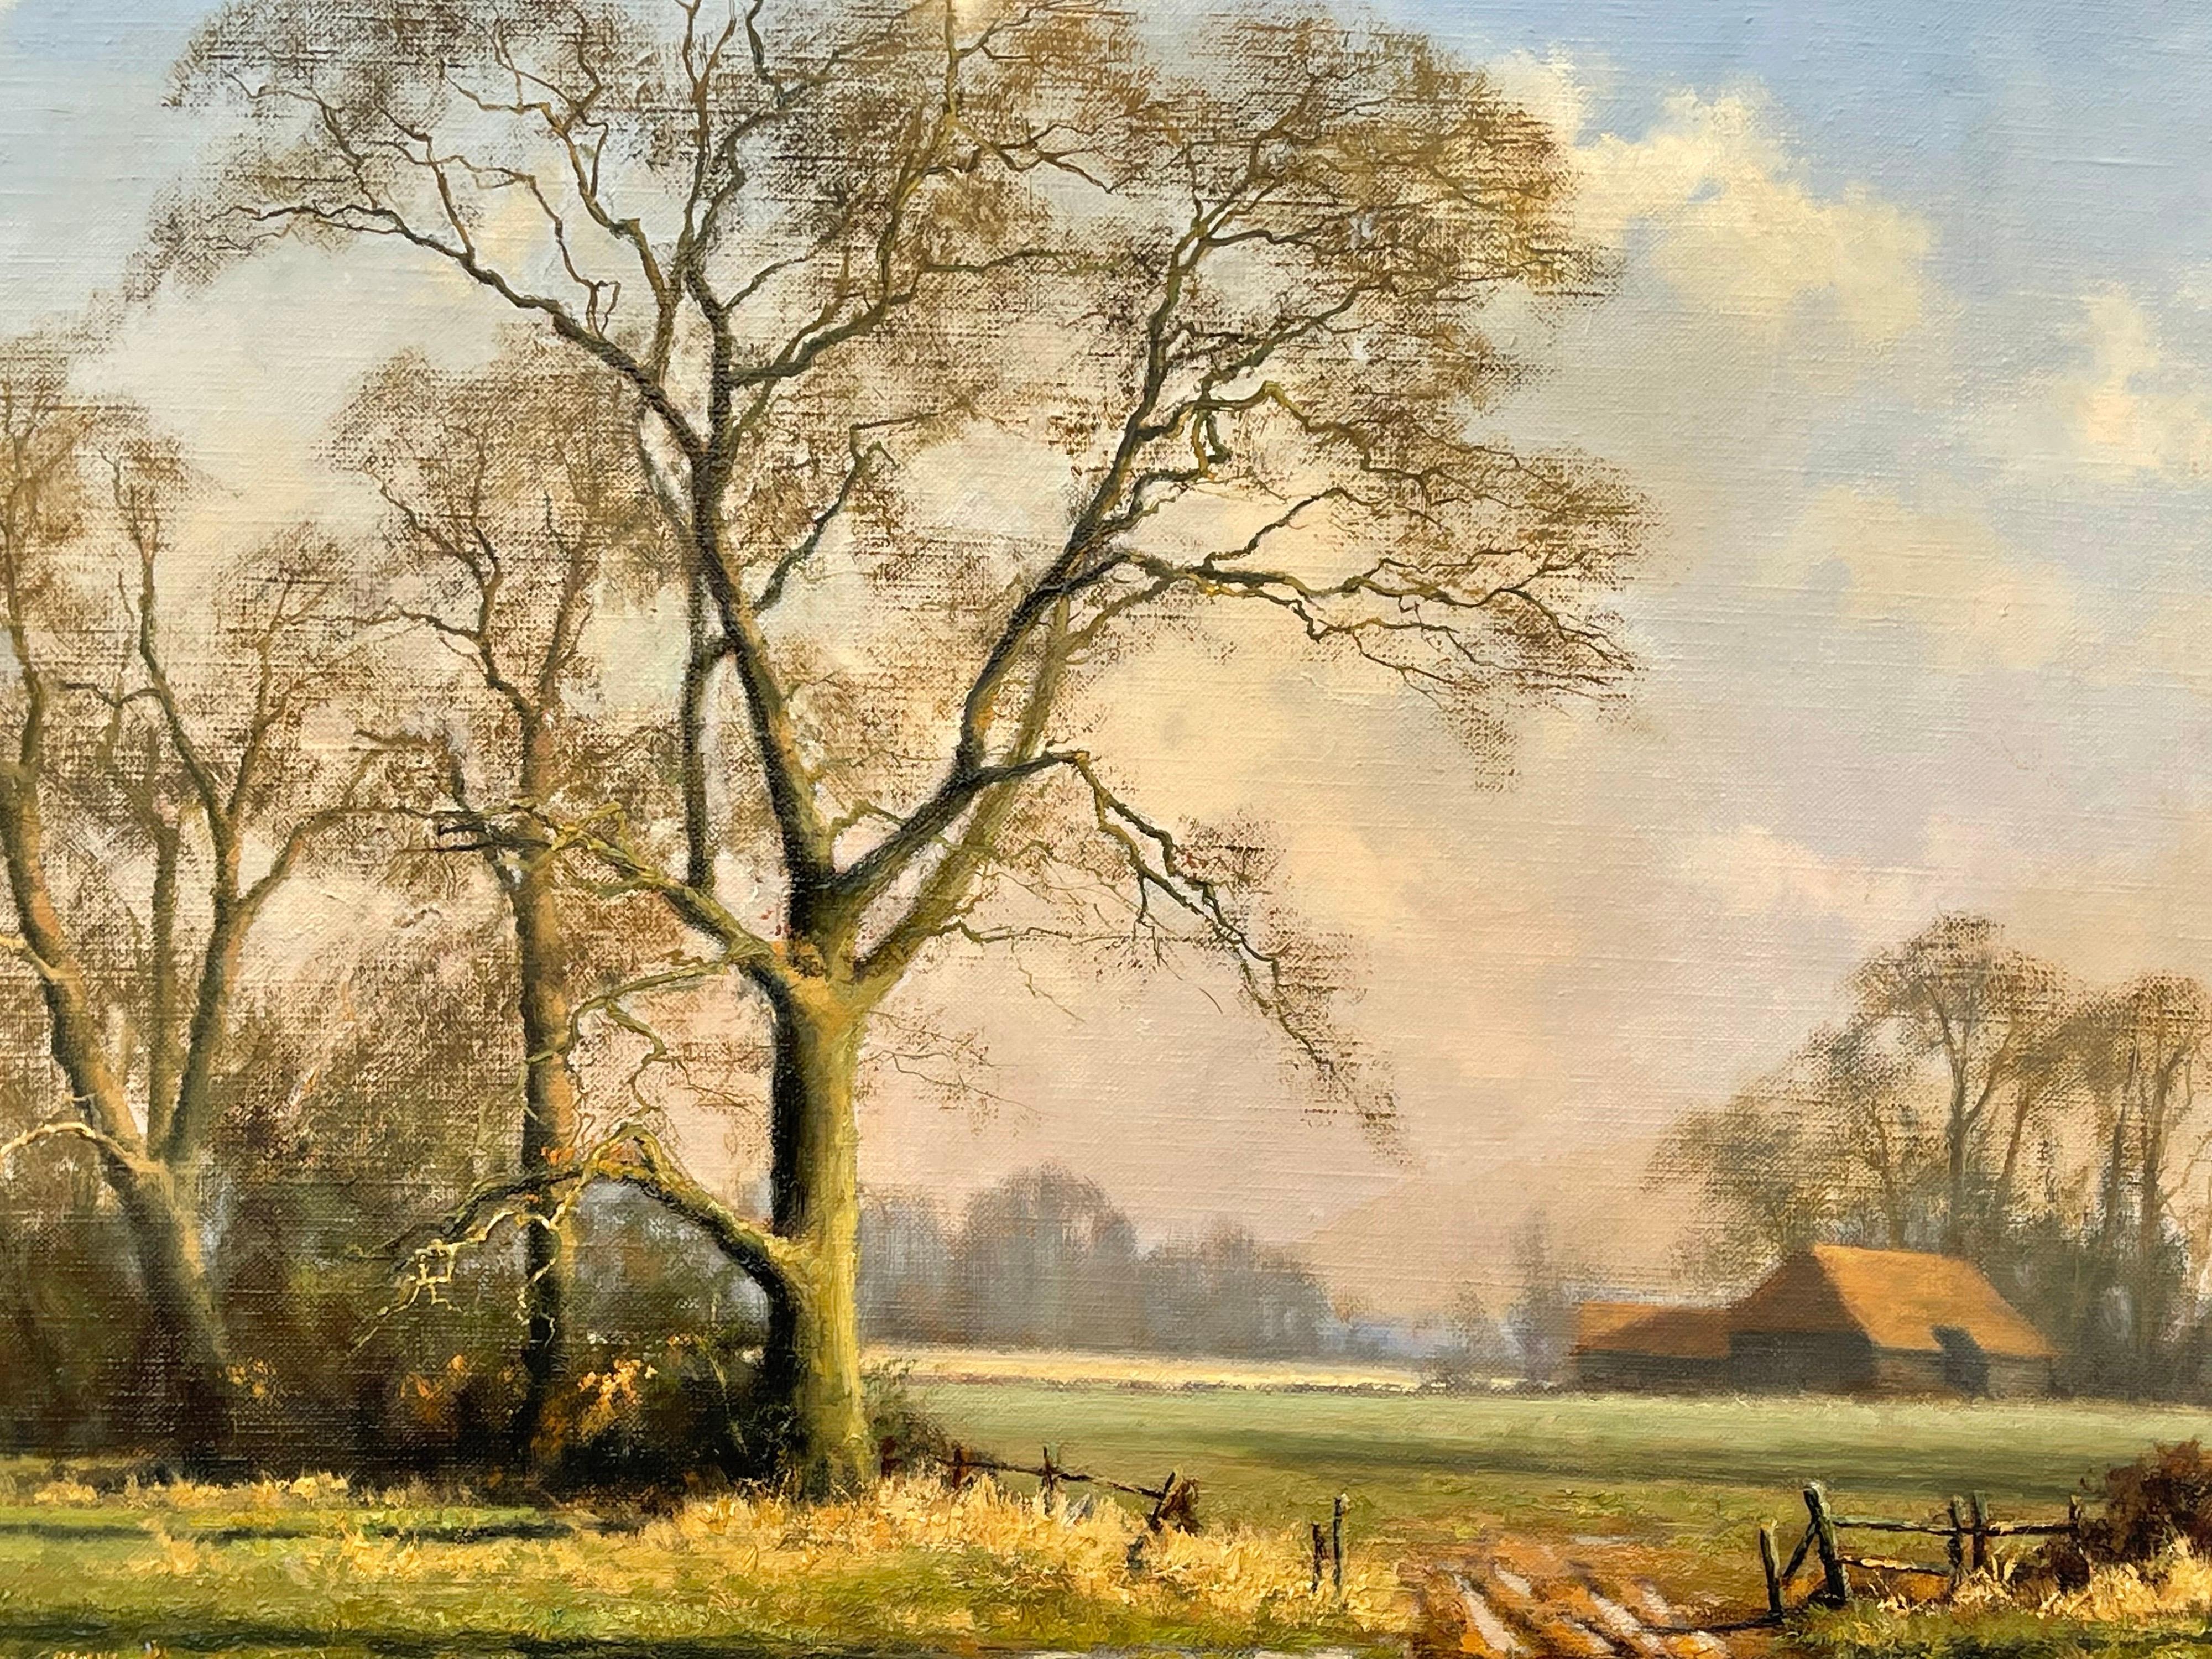 Oil Painting of Rural Winter Scene with Oak Trees in England by British Artist For Sale 8